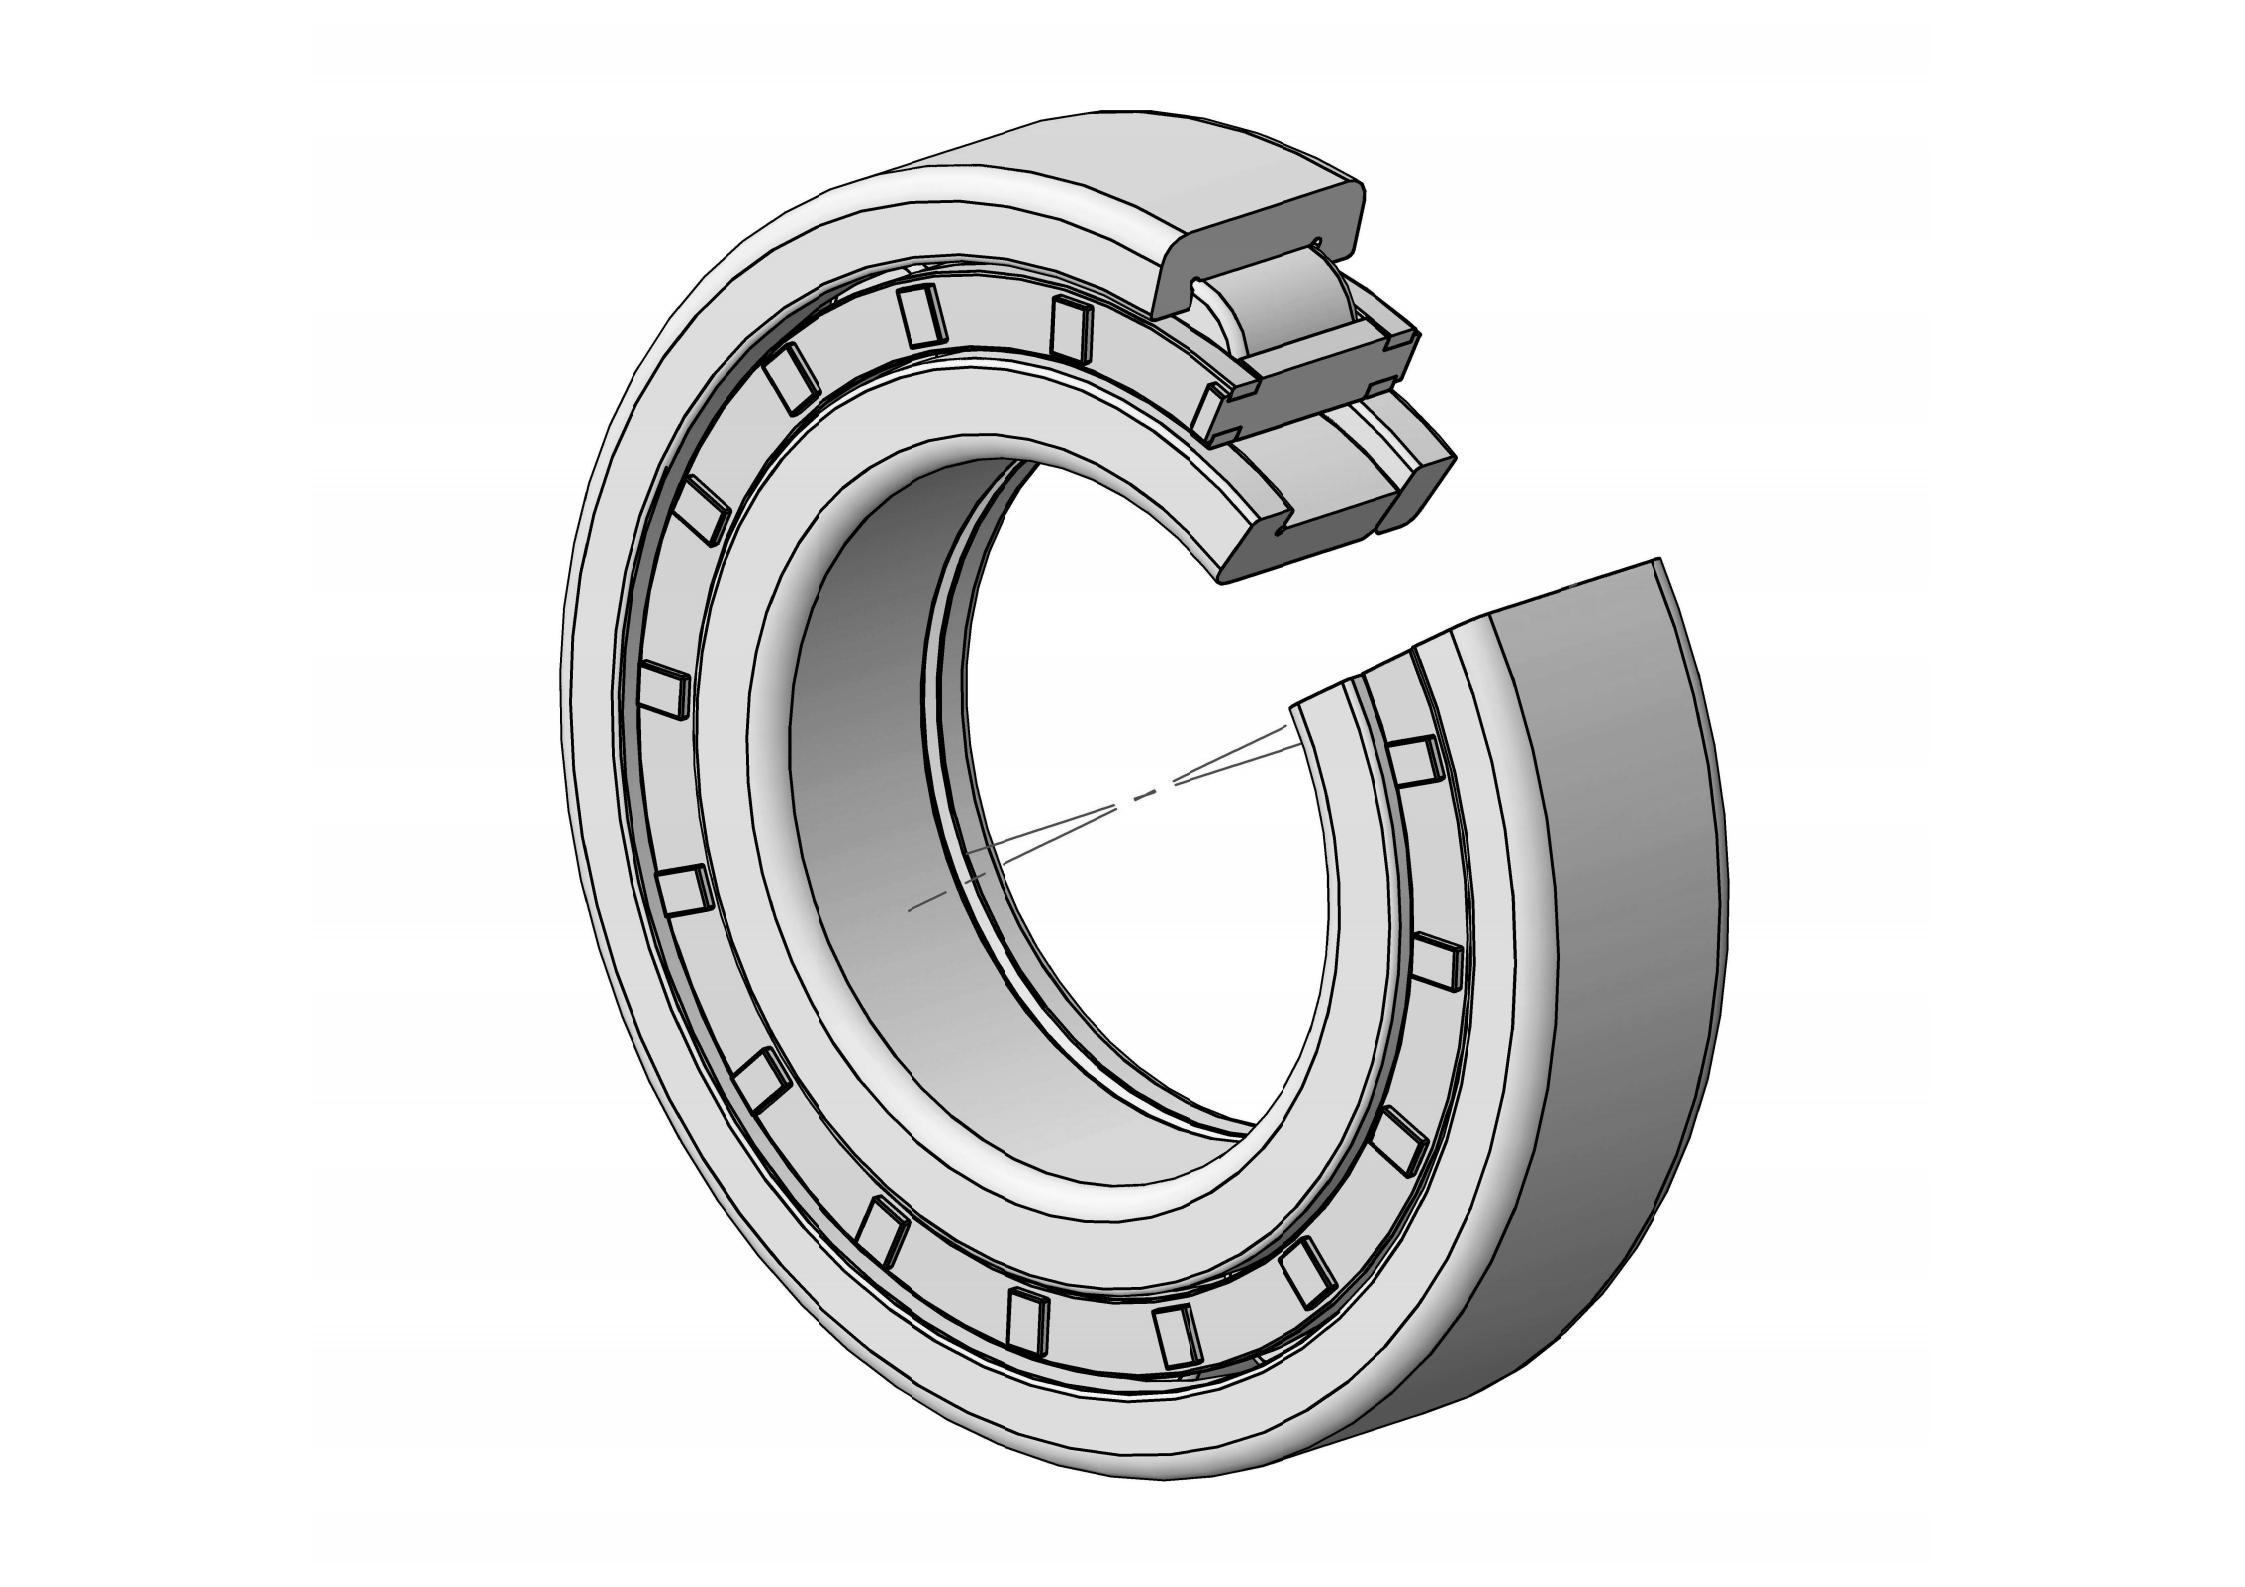 NUP2310-E Single Row Cylindrical roller bearing 